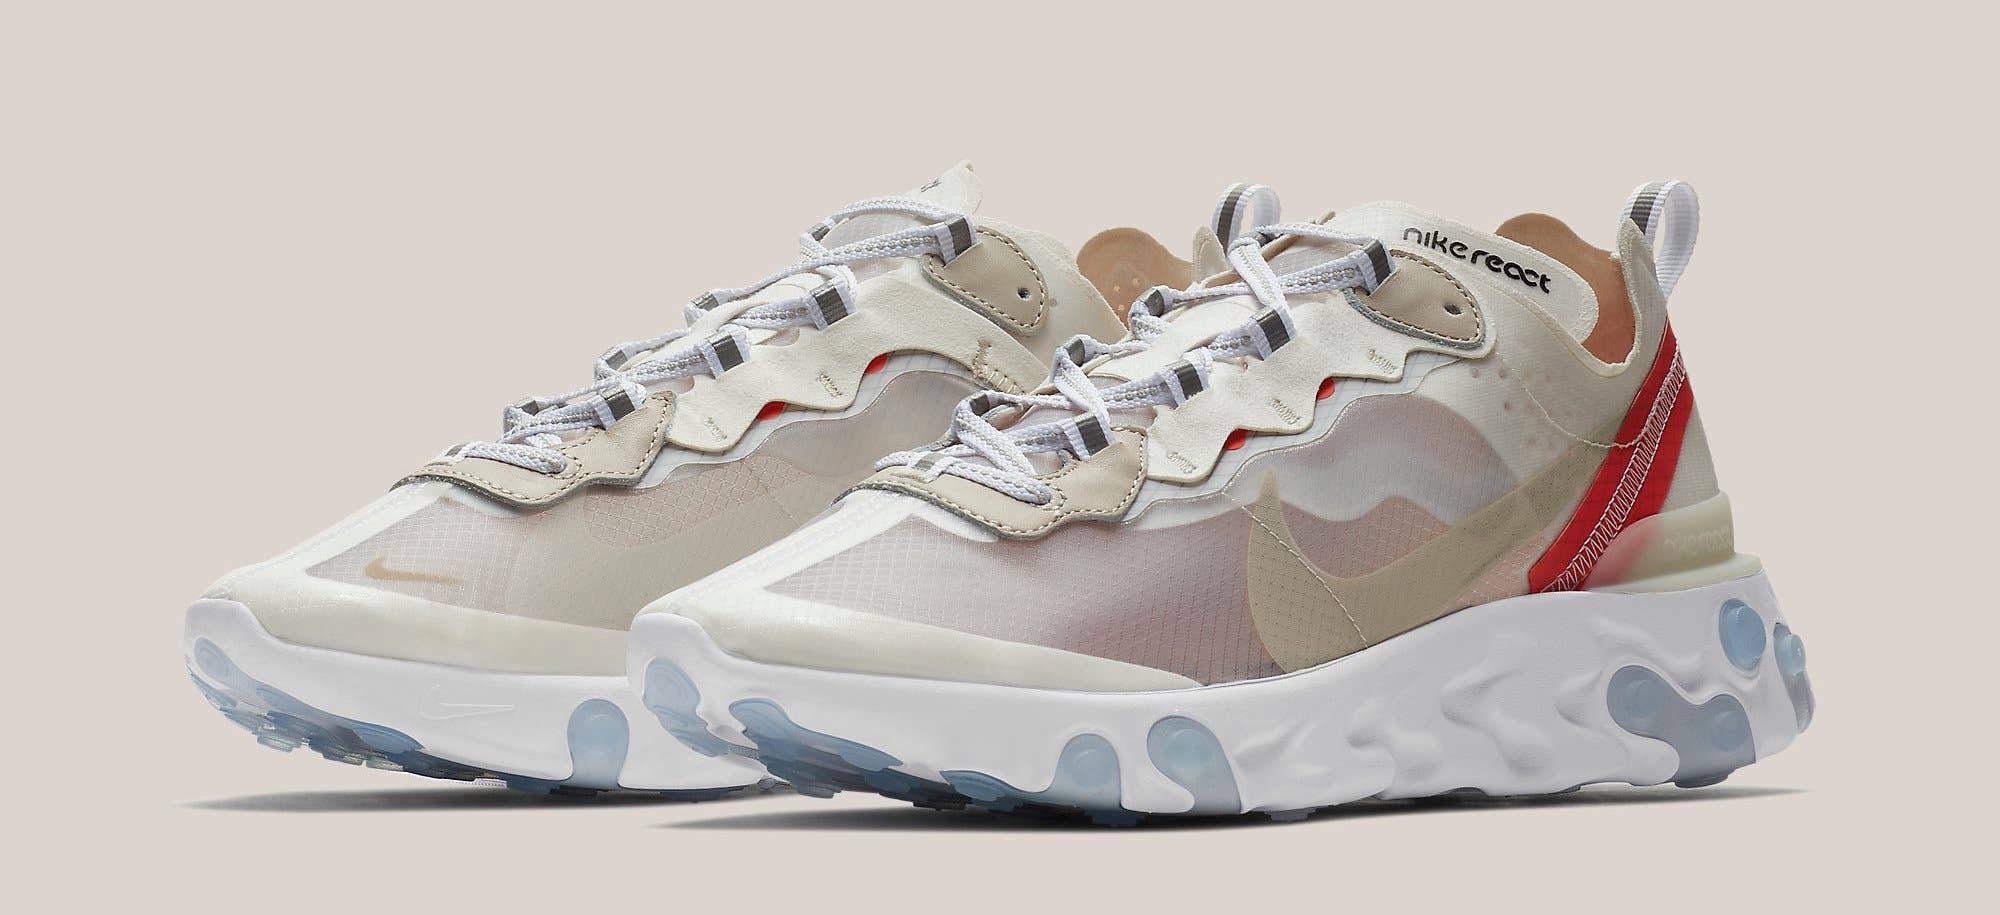 Gangster Sag deltager Best Look Yet at the Nike React Element 87s | Complex